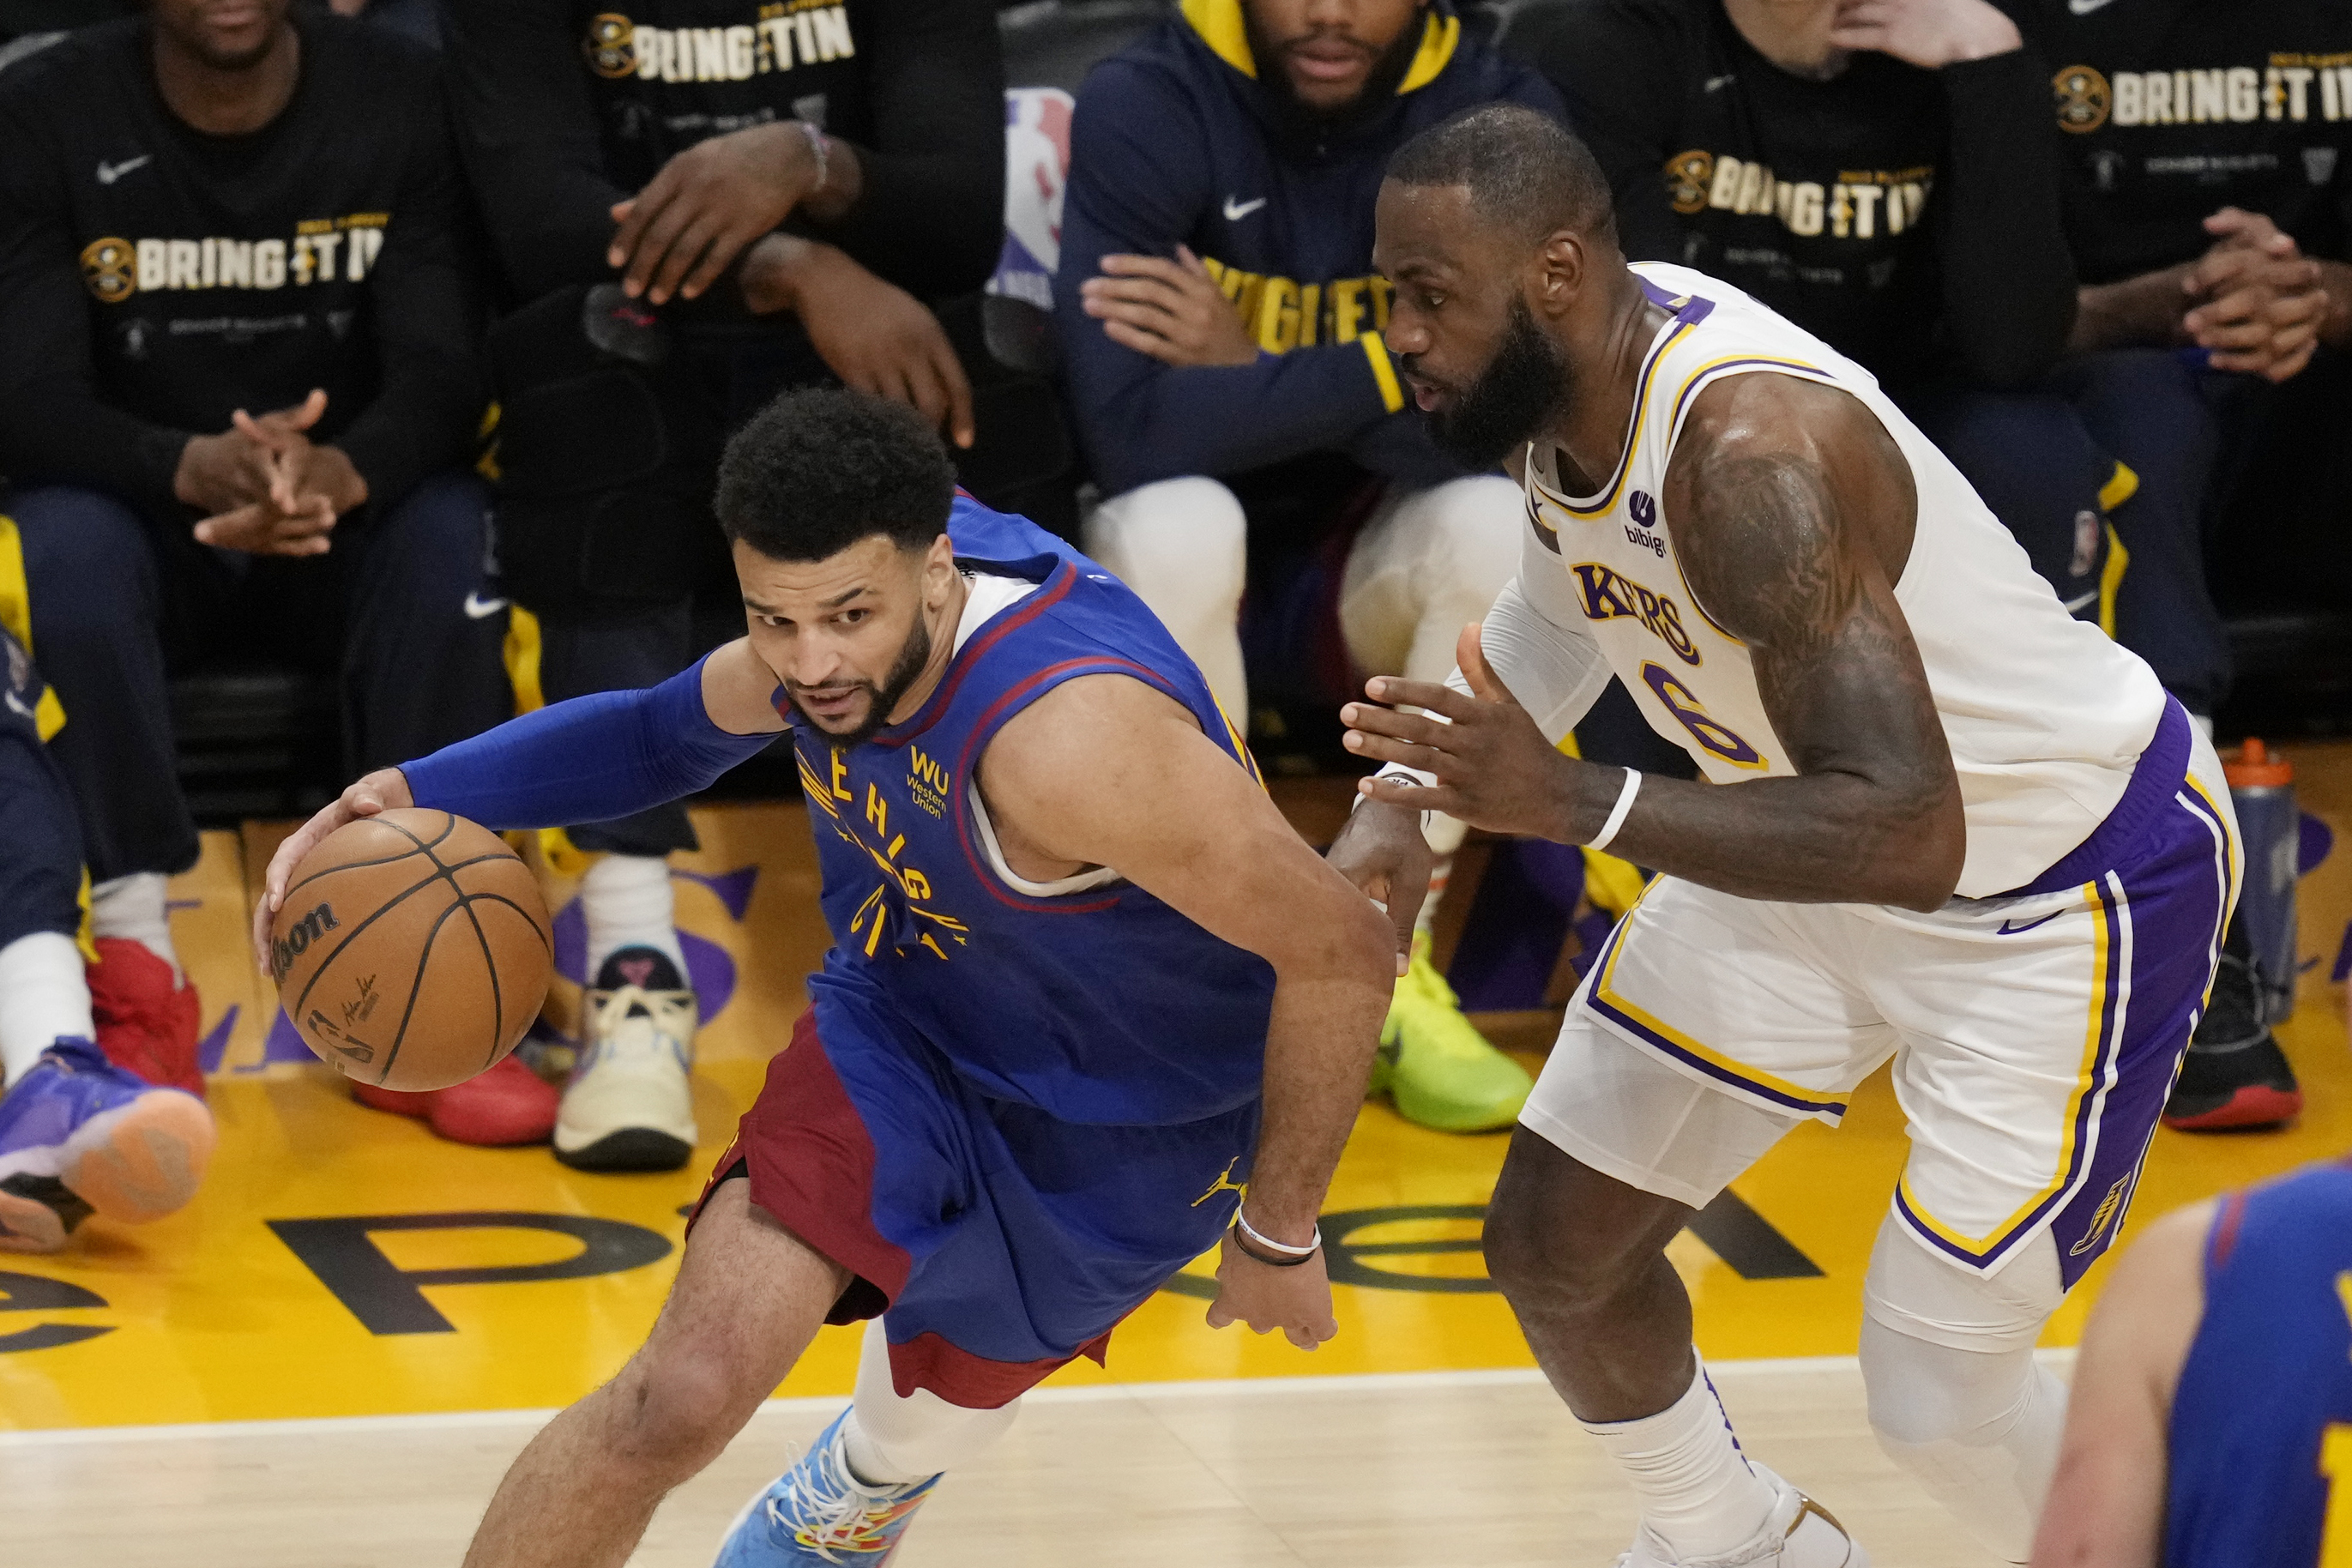 NBA announces Lakers vs. Nuggets Western Conference Finals